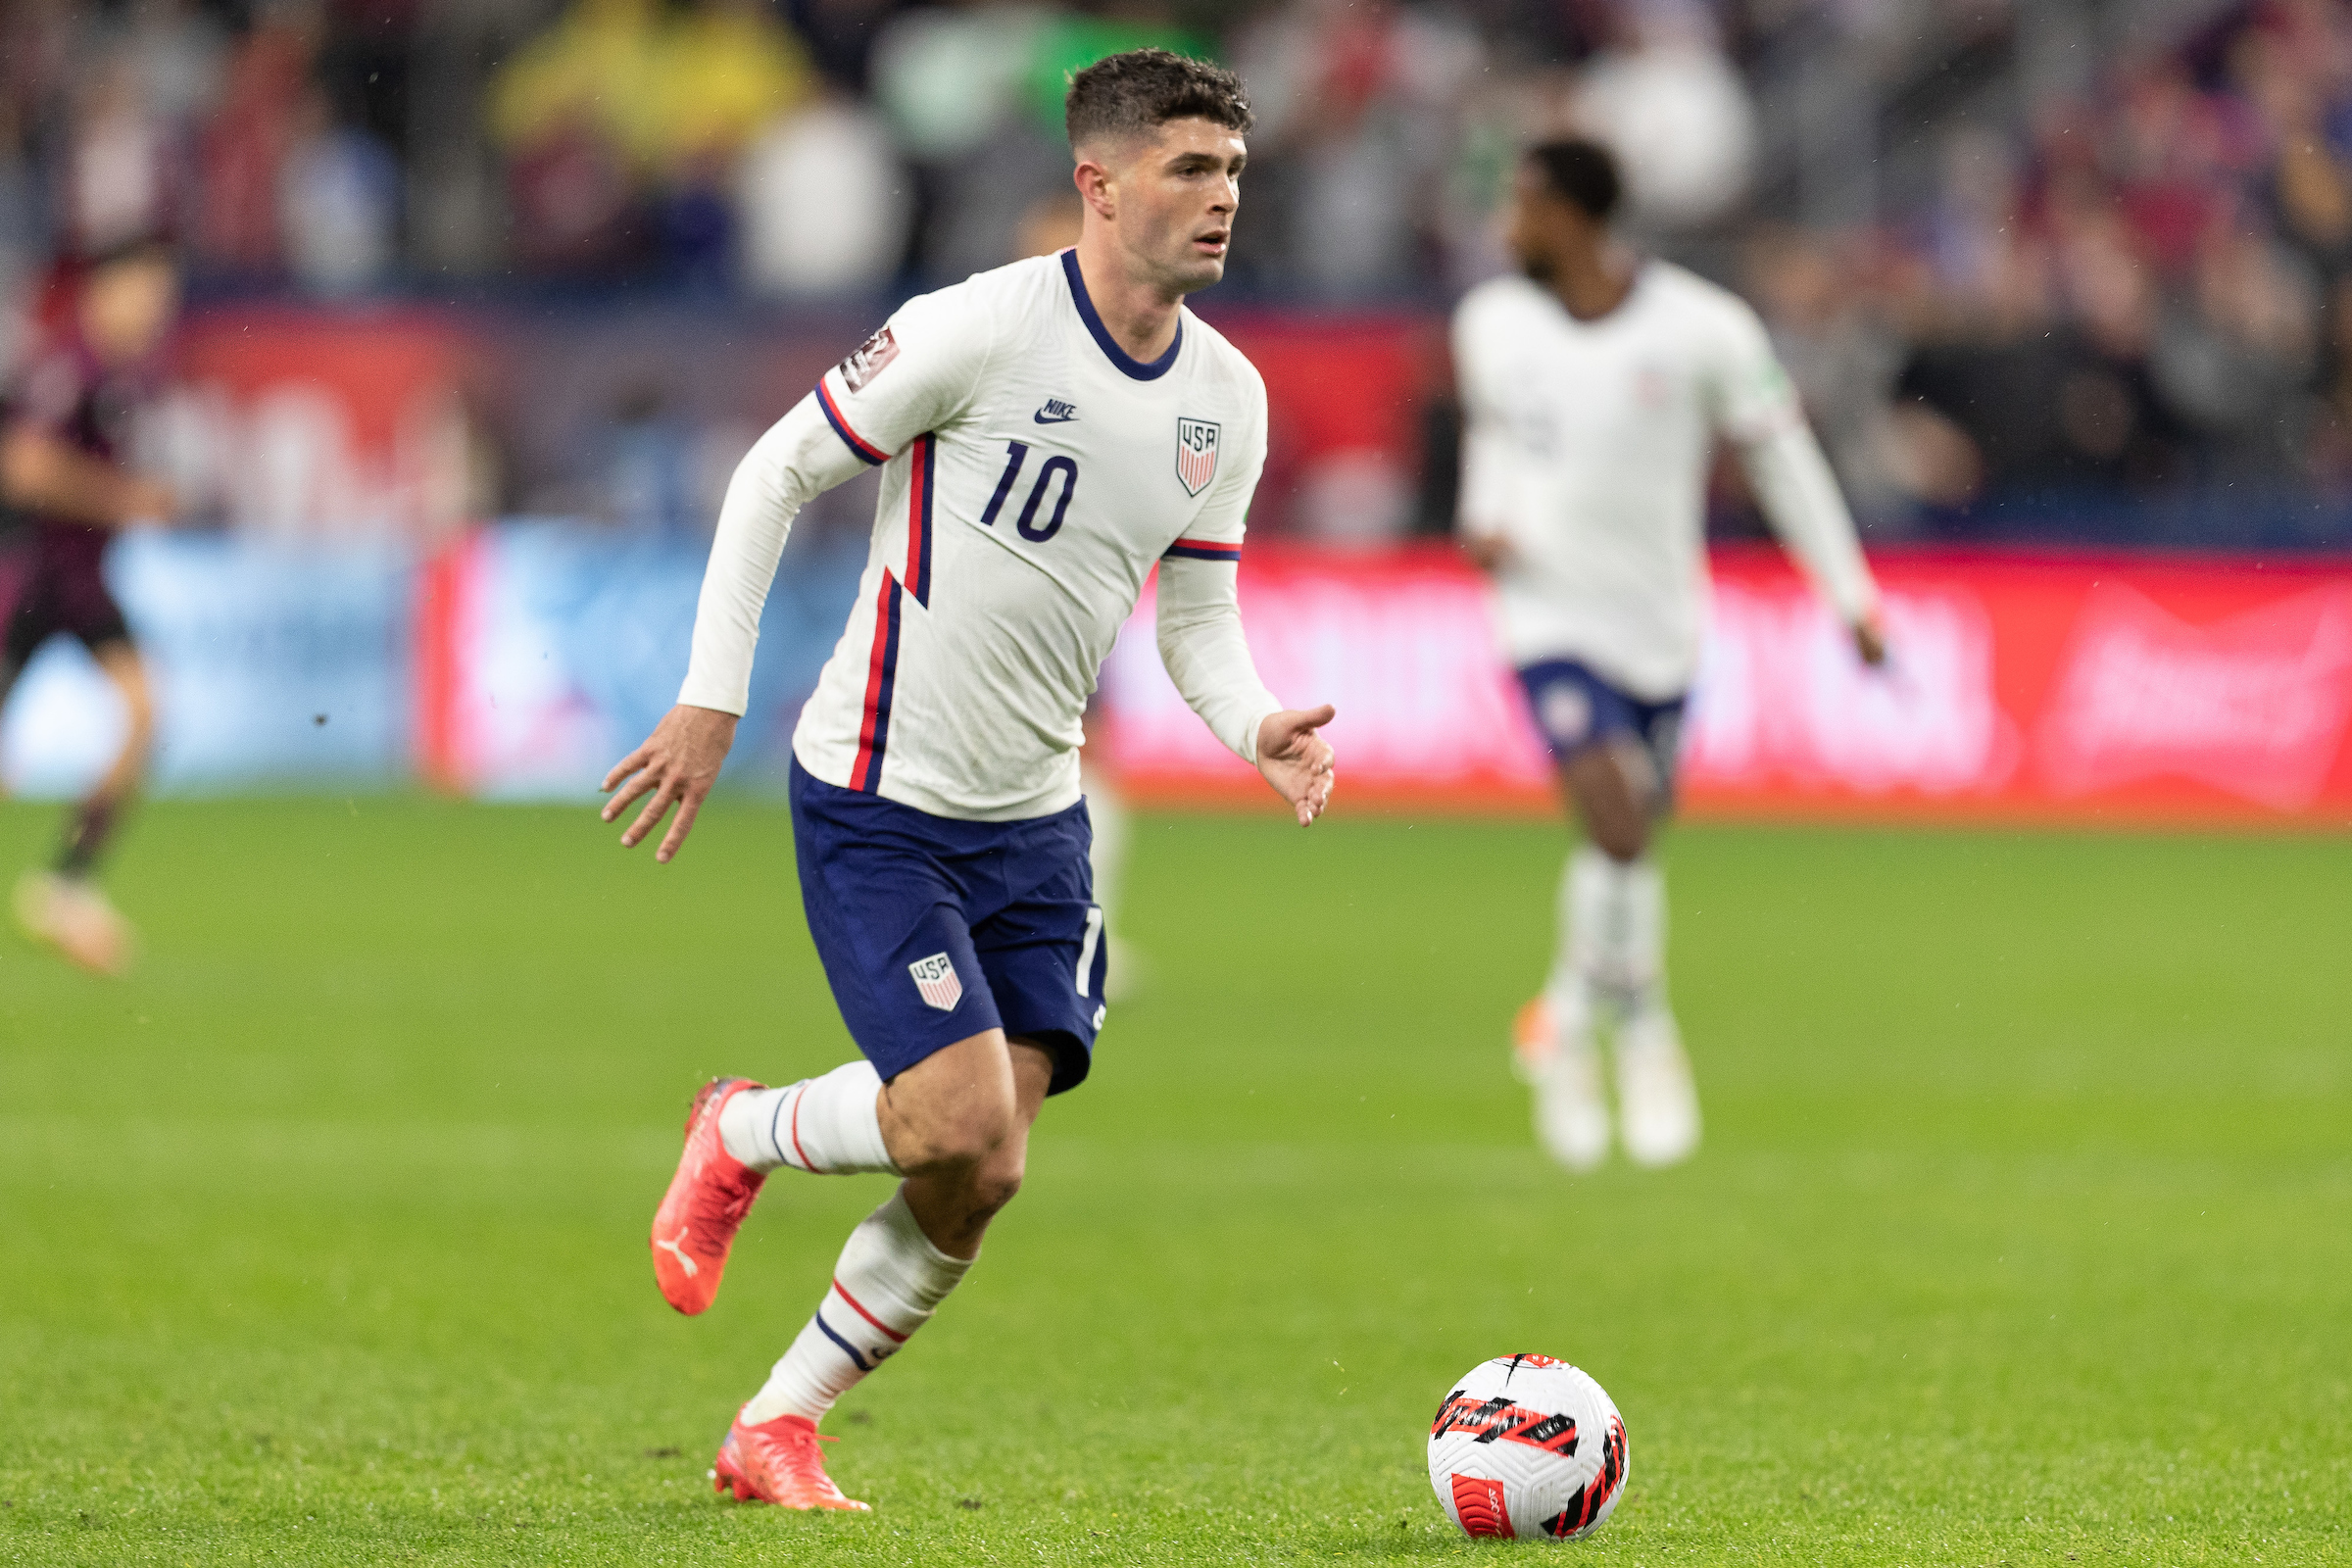 USMNT REWIND: Ahead of Big Month, Christian Pulisic Continues to Aid Chelsea